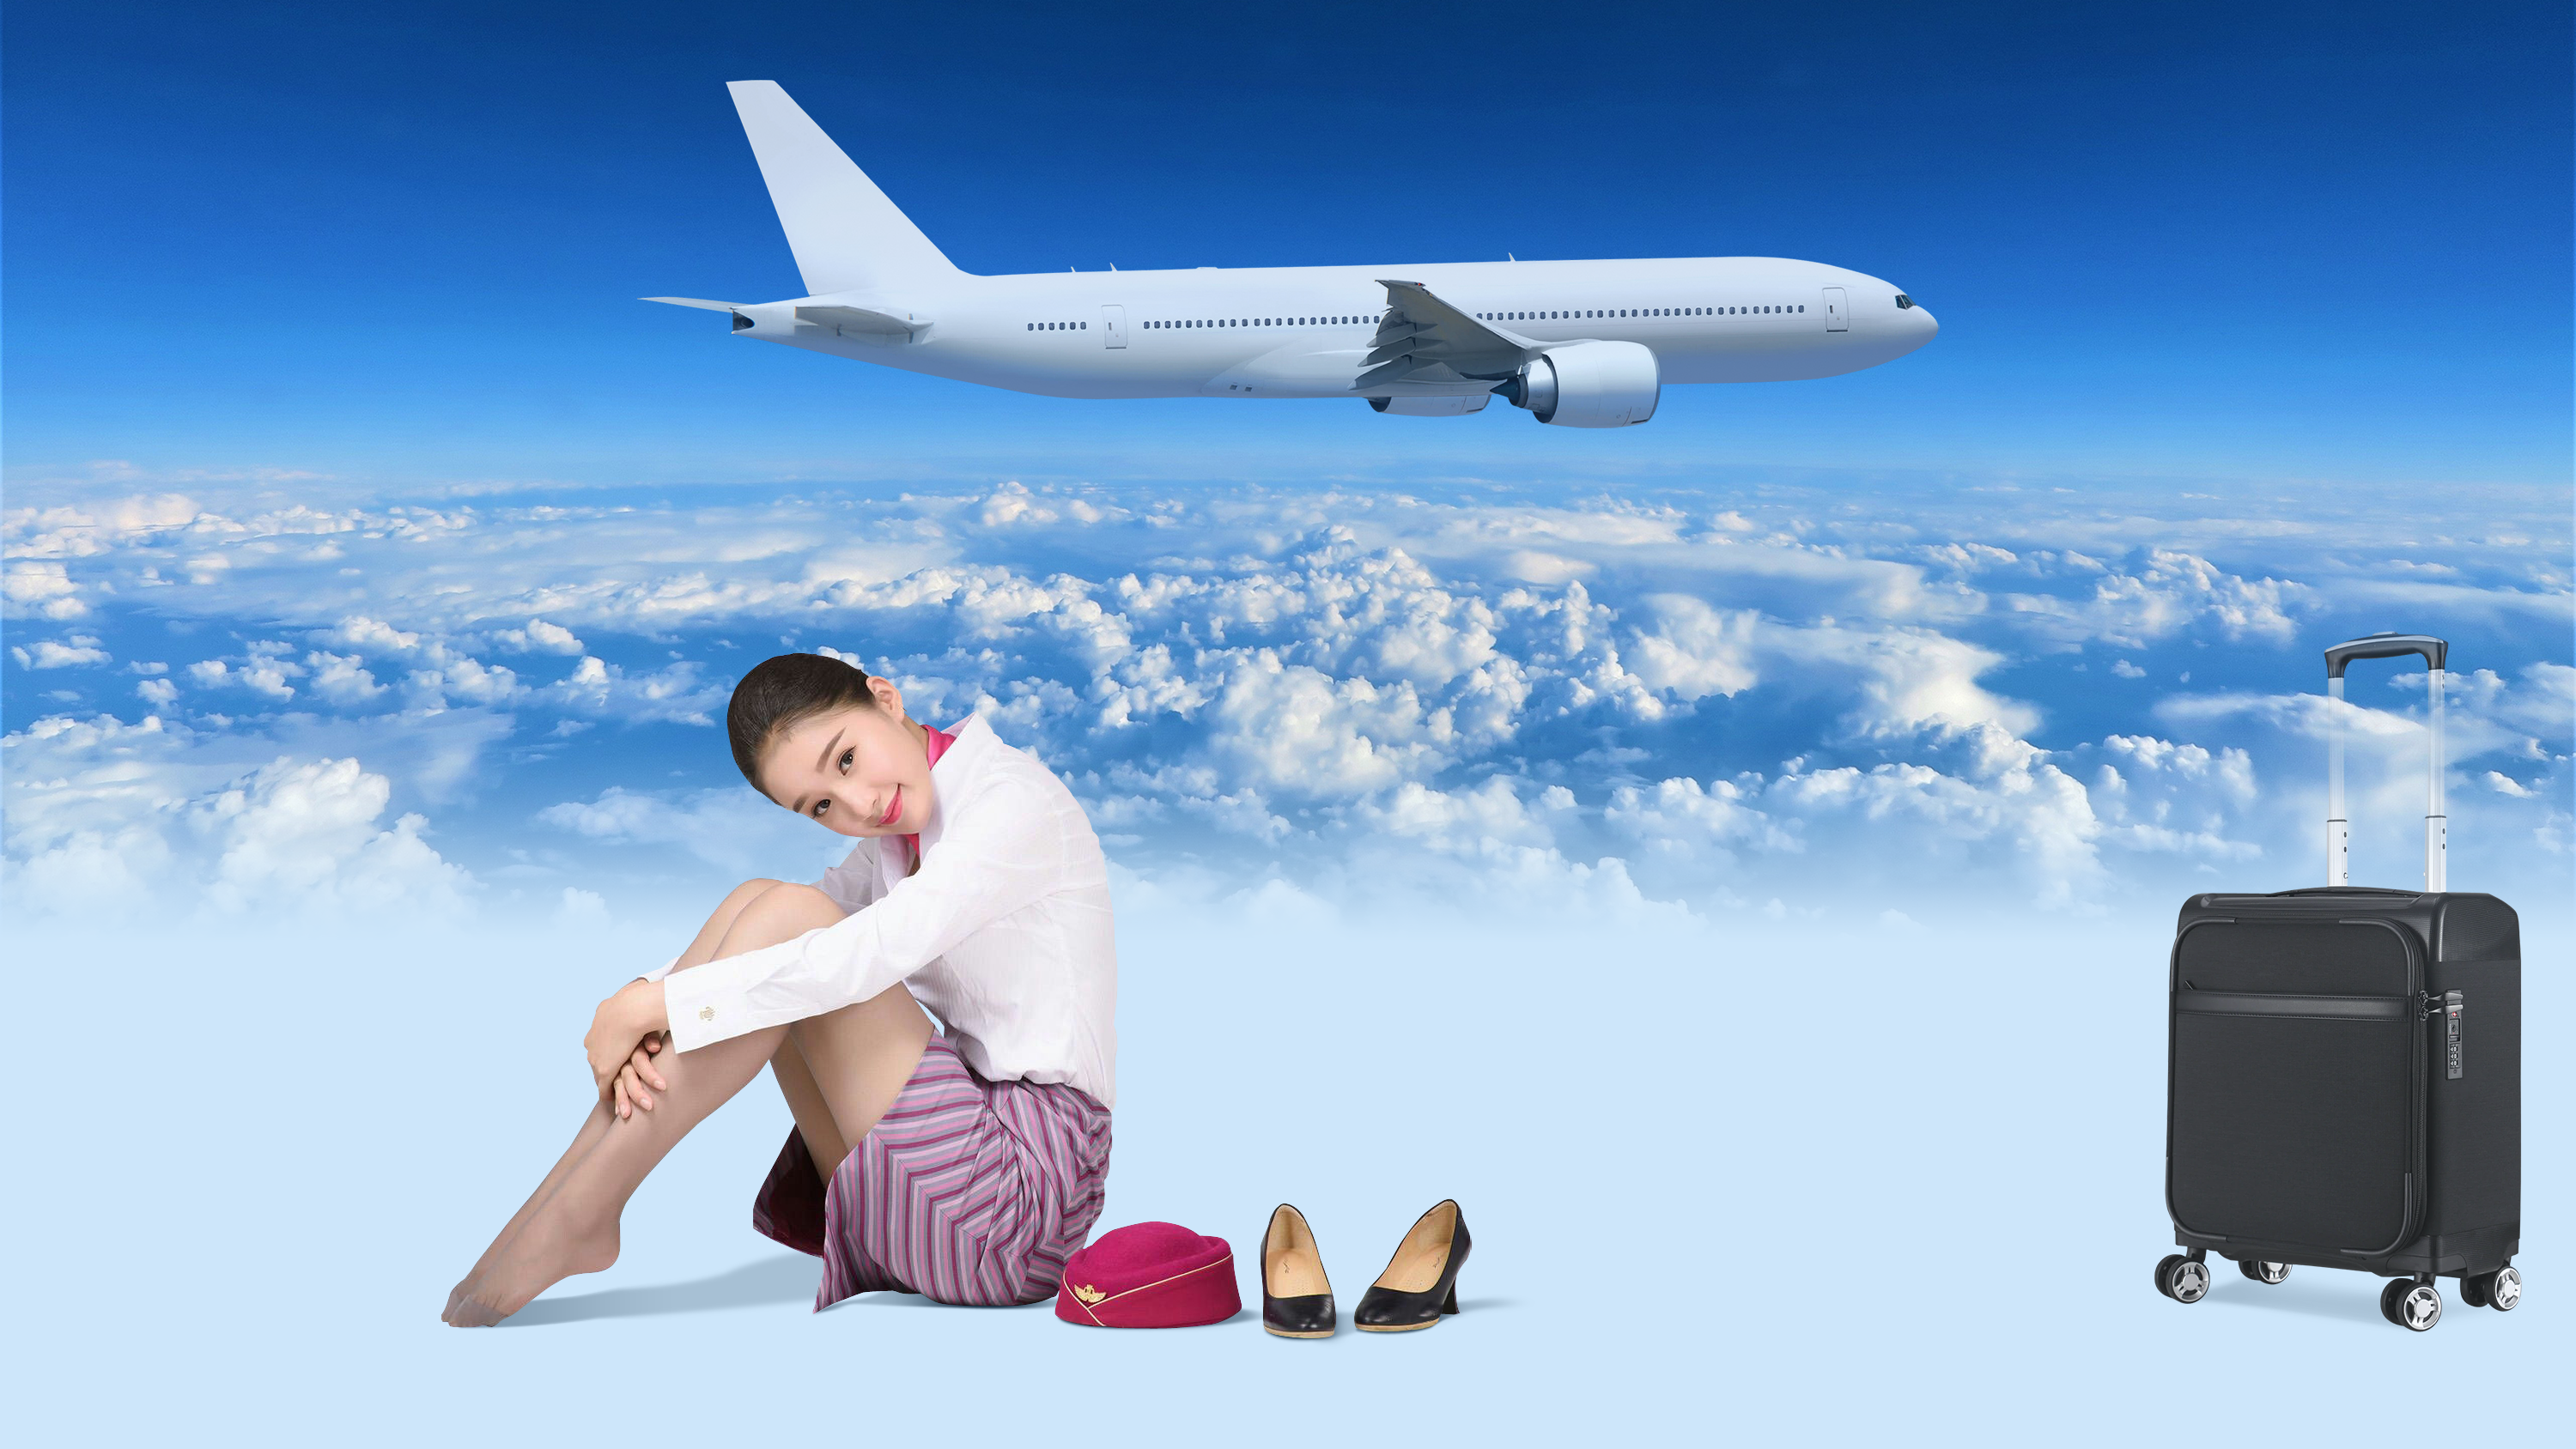 Flight Attendant Reinforced Toe Airplane Asian Aircraft Sky Clouds Looking At Viewer Smiling Women 3000x1688